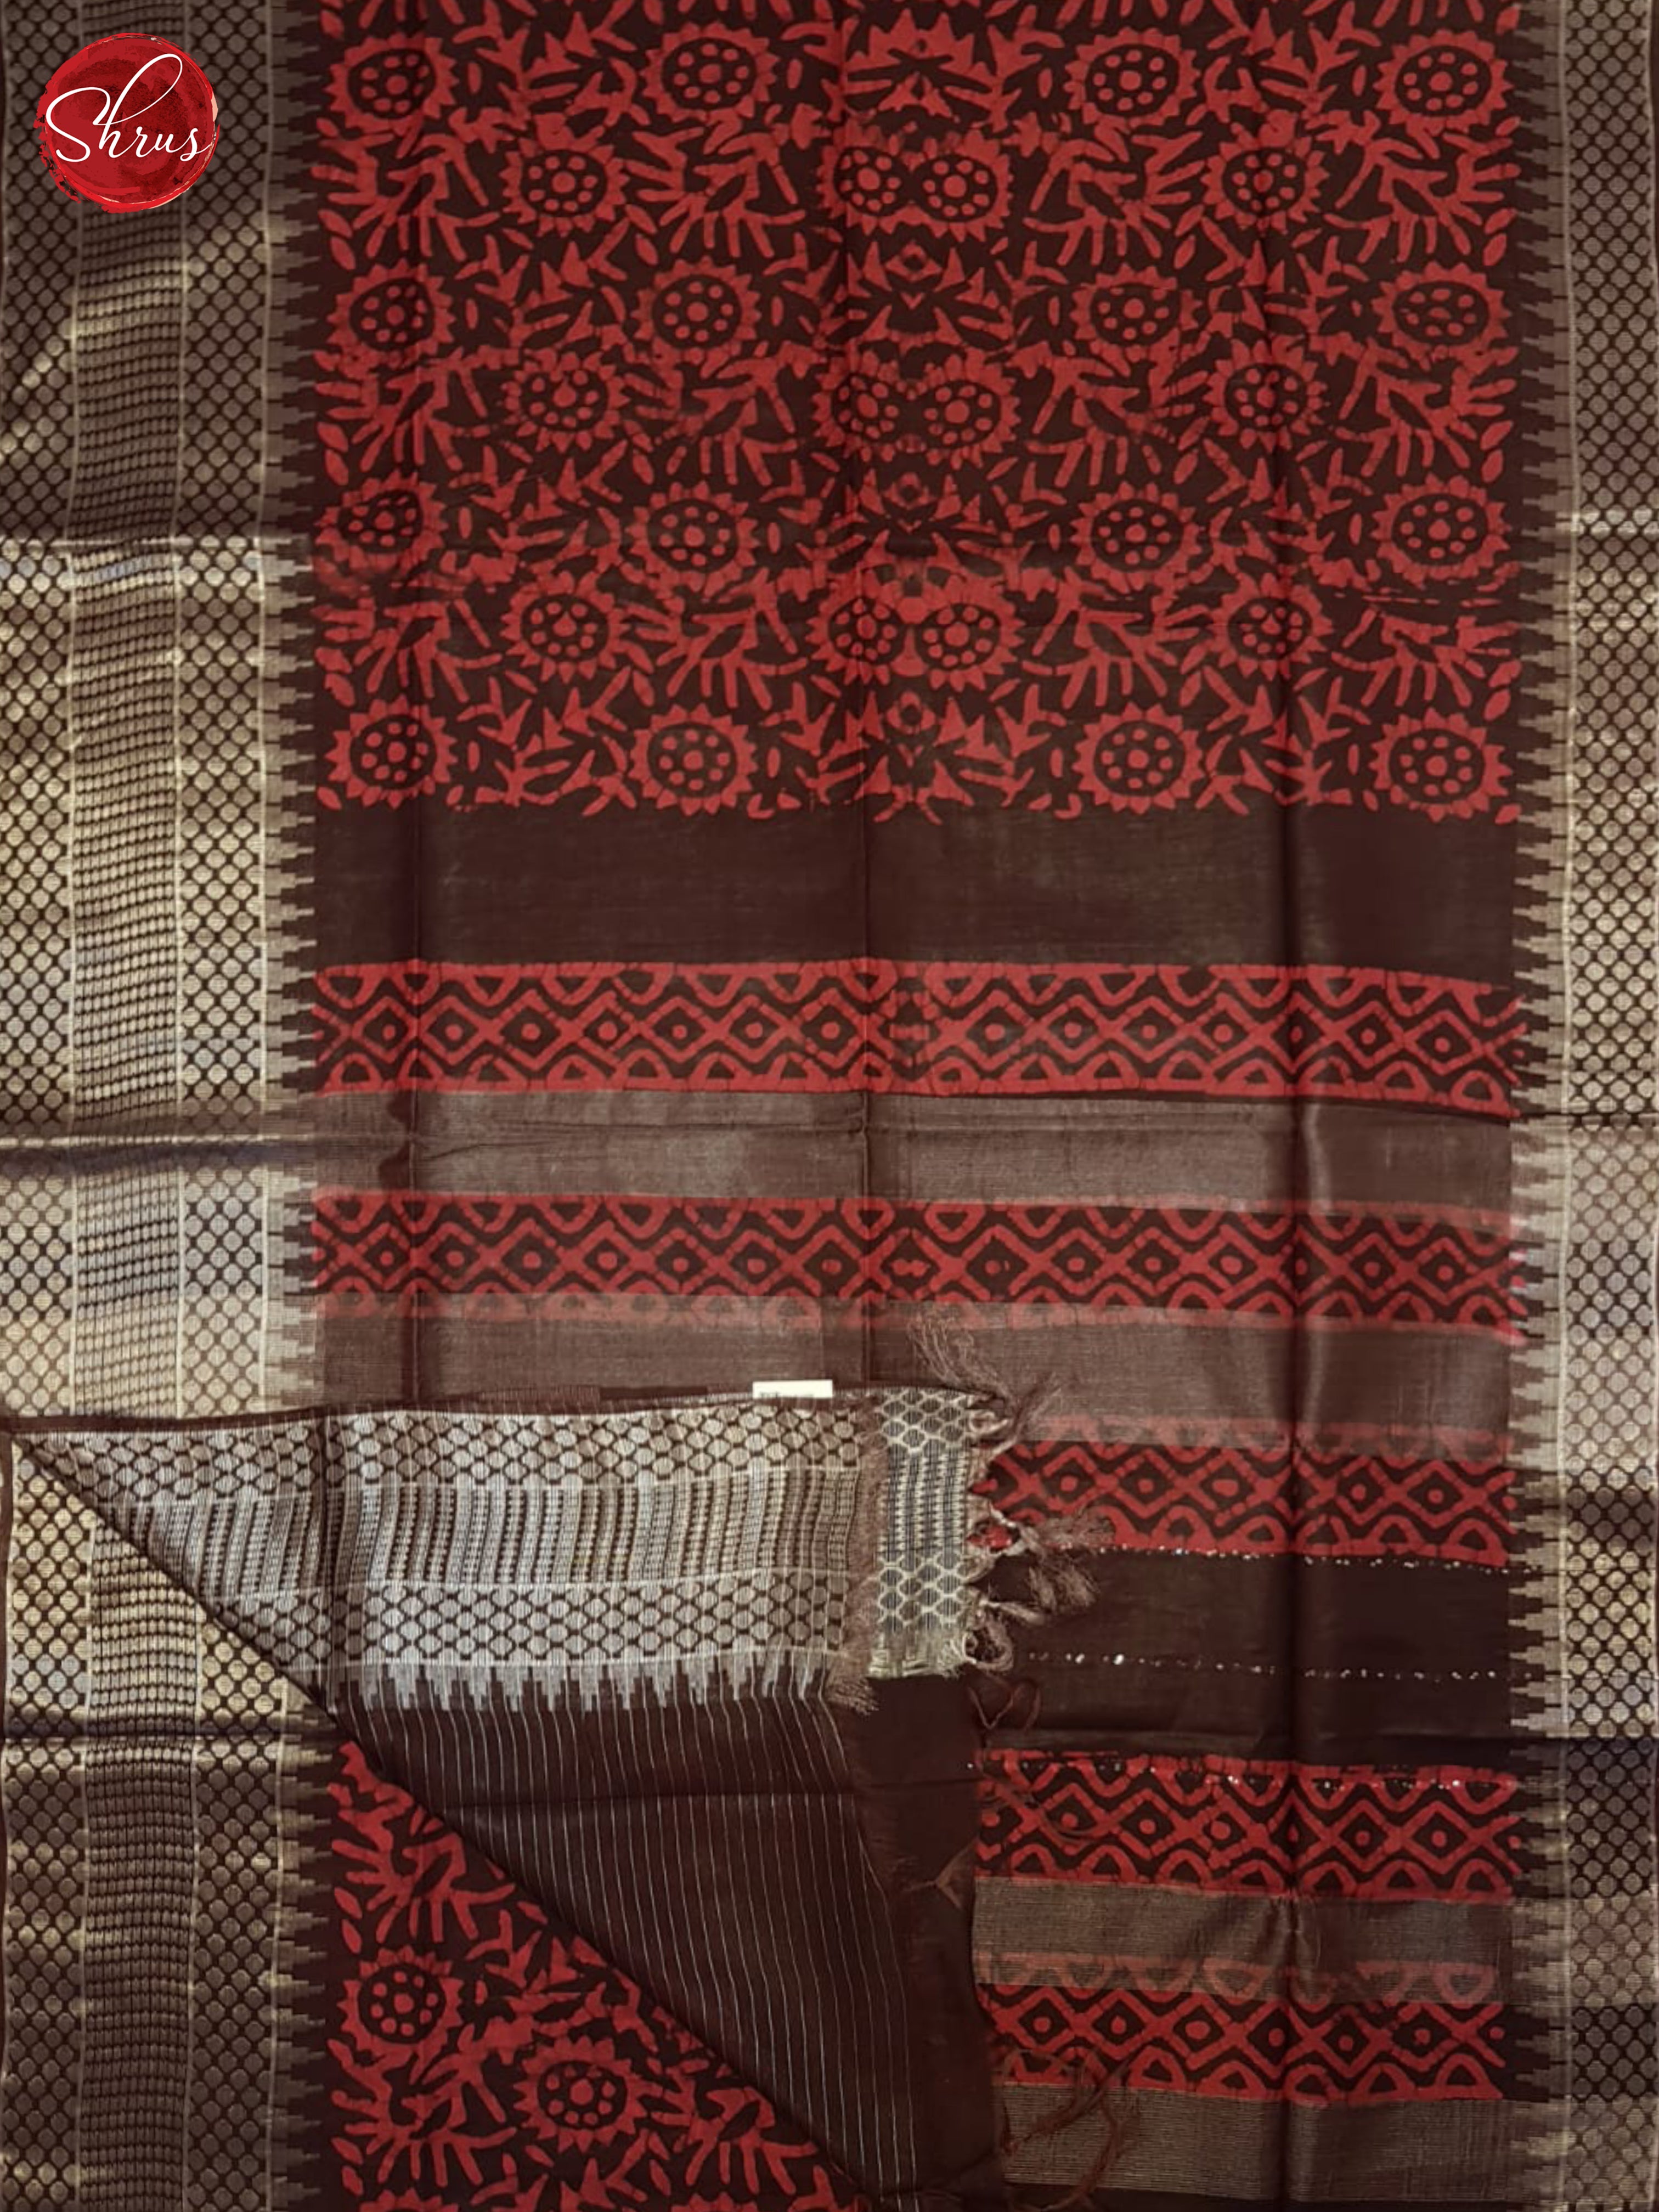 Red And Brown- Bhatik Saree - Shop on ShrusEternity.com